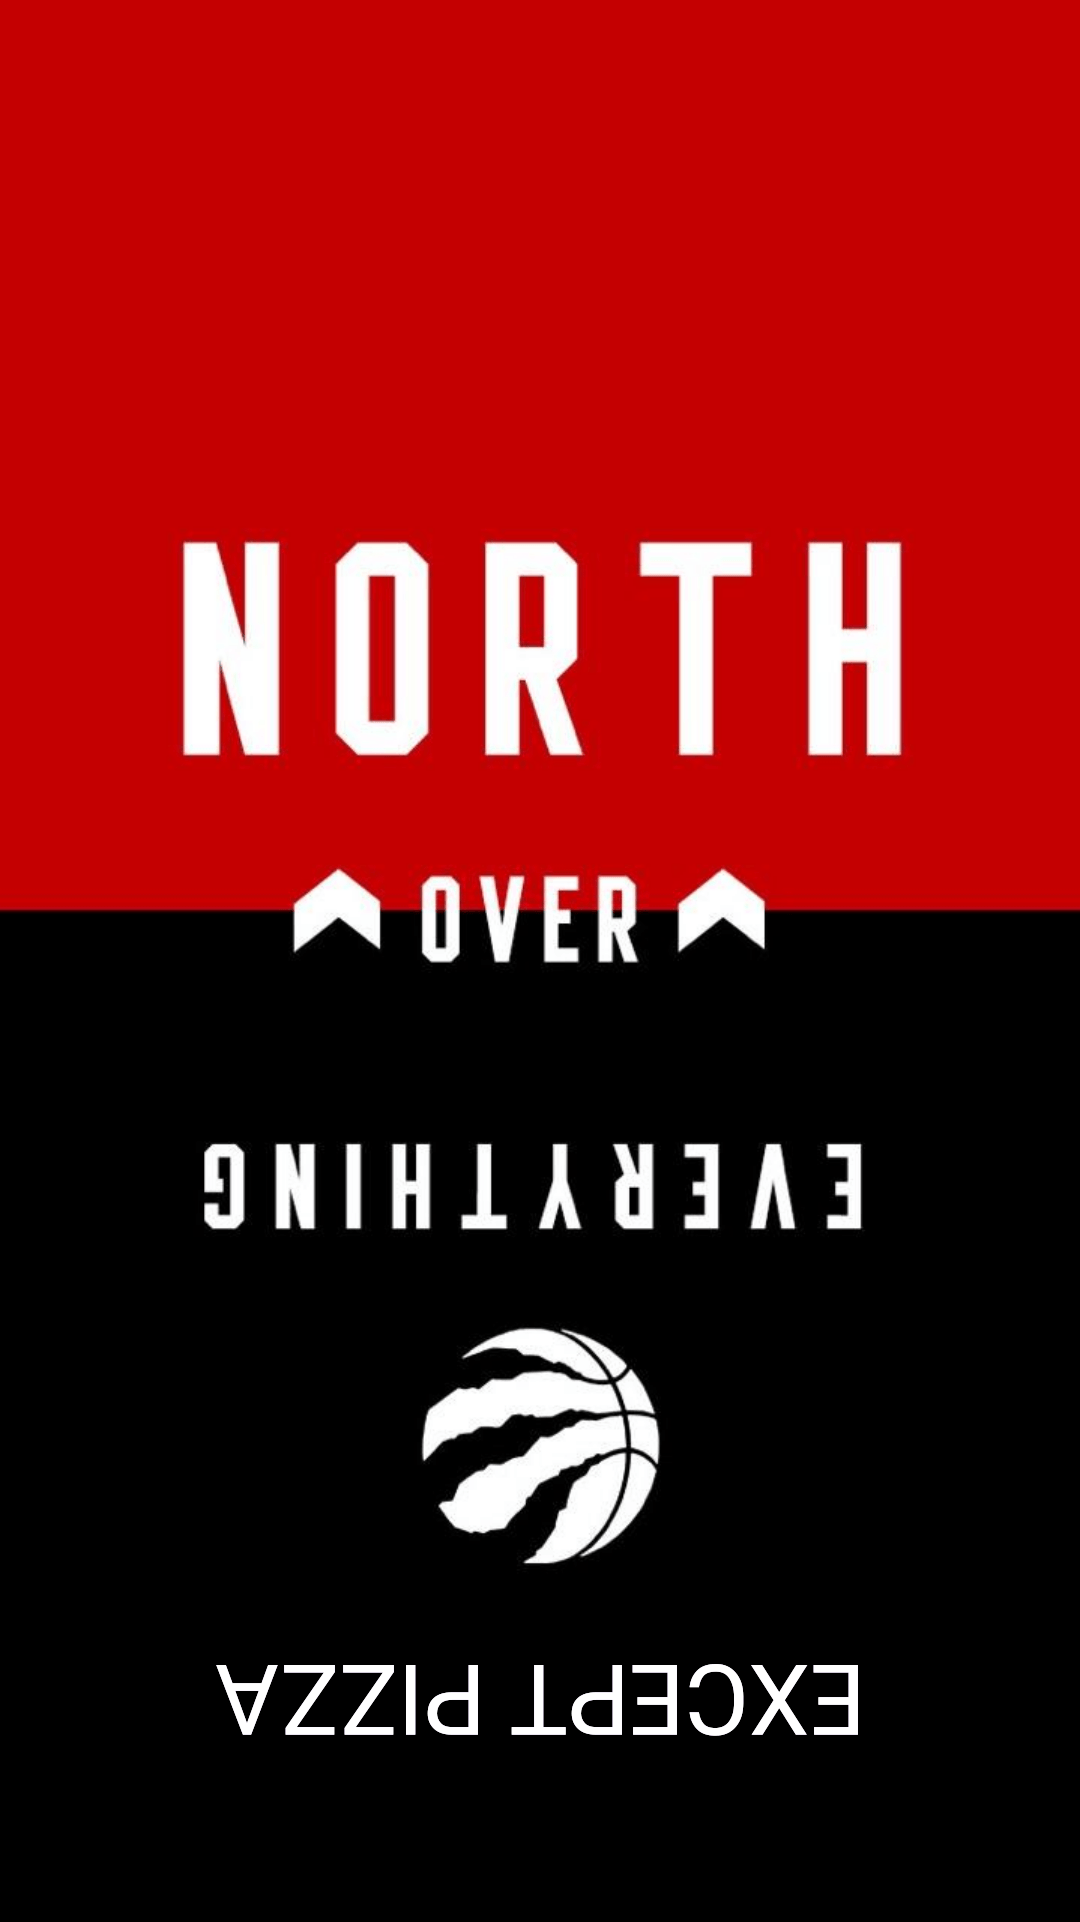 North over everything wallpaper I made a few weeks back, its great